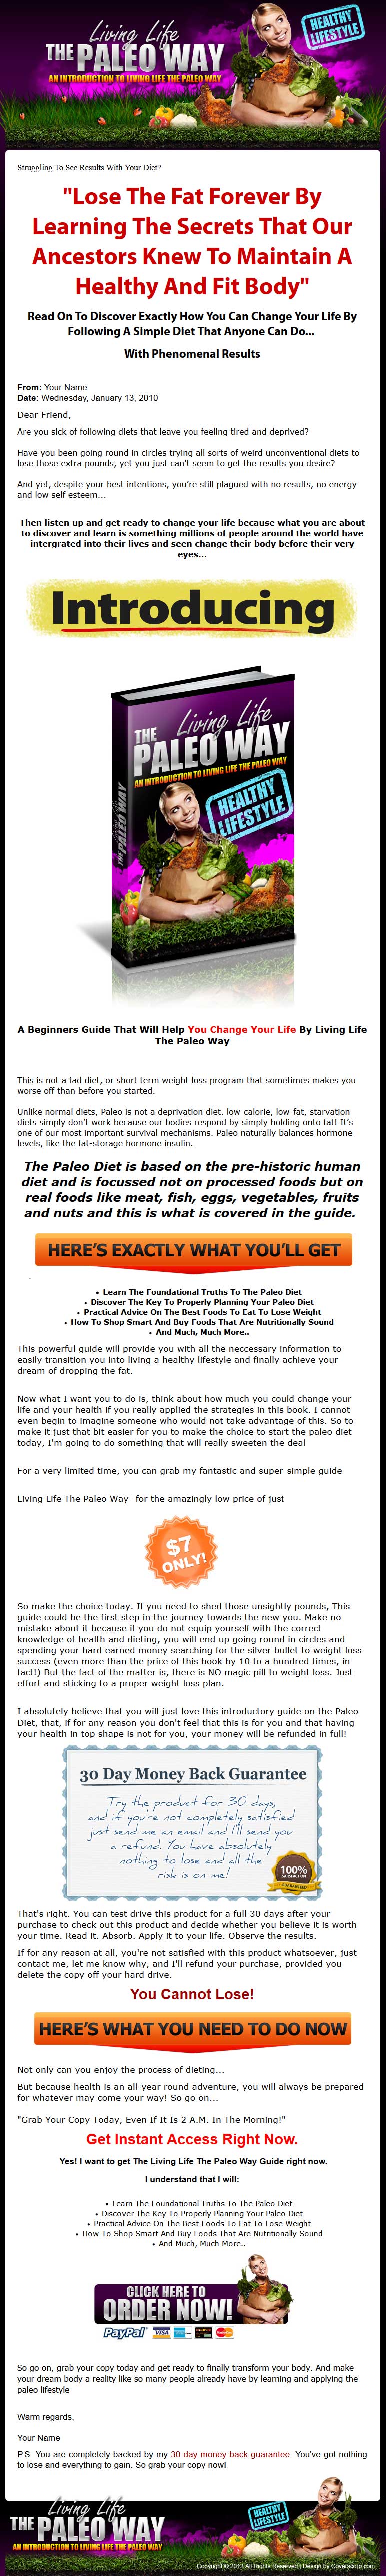 Paleo Diet PLR Ebook with Private Label Rights